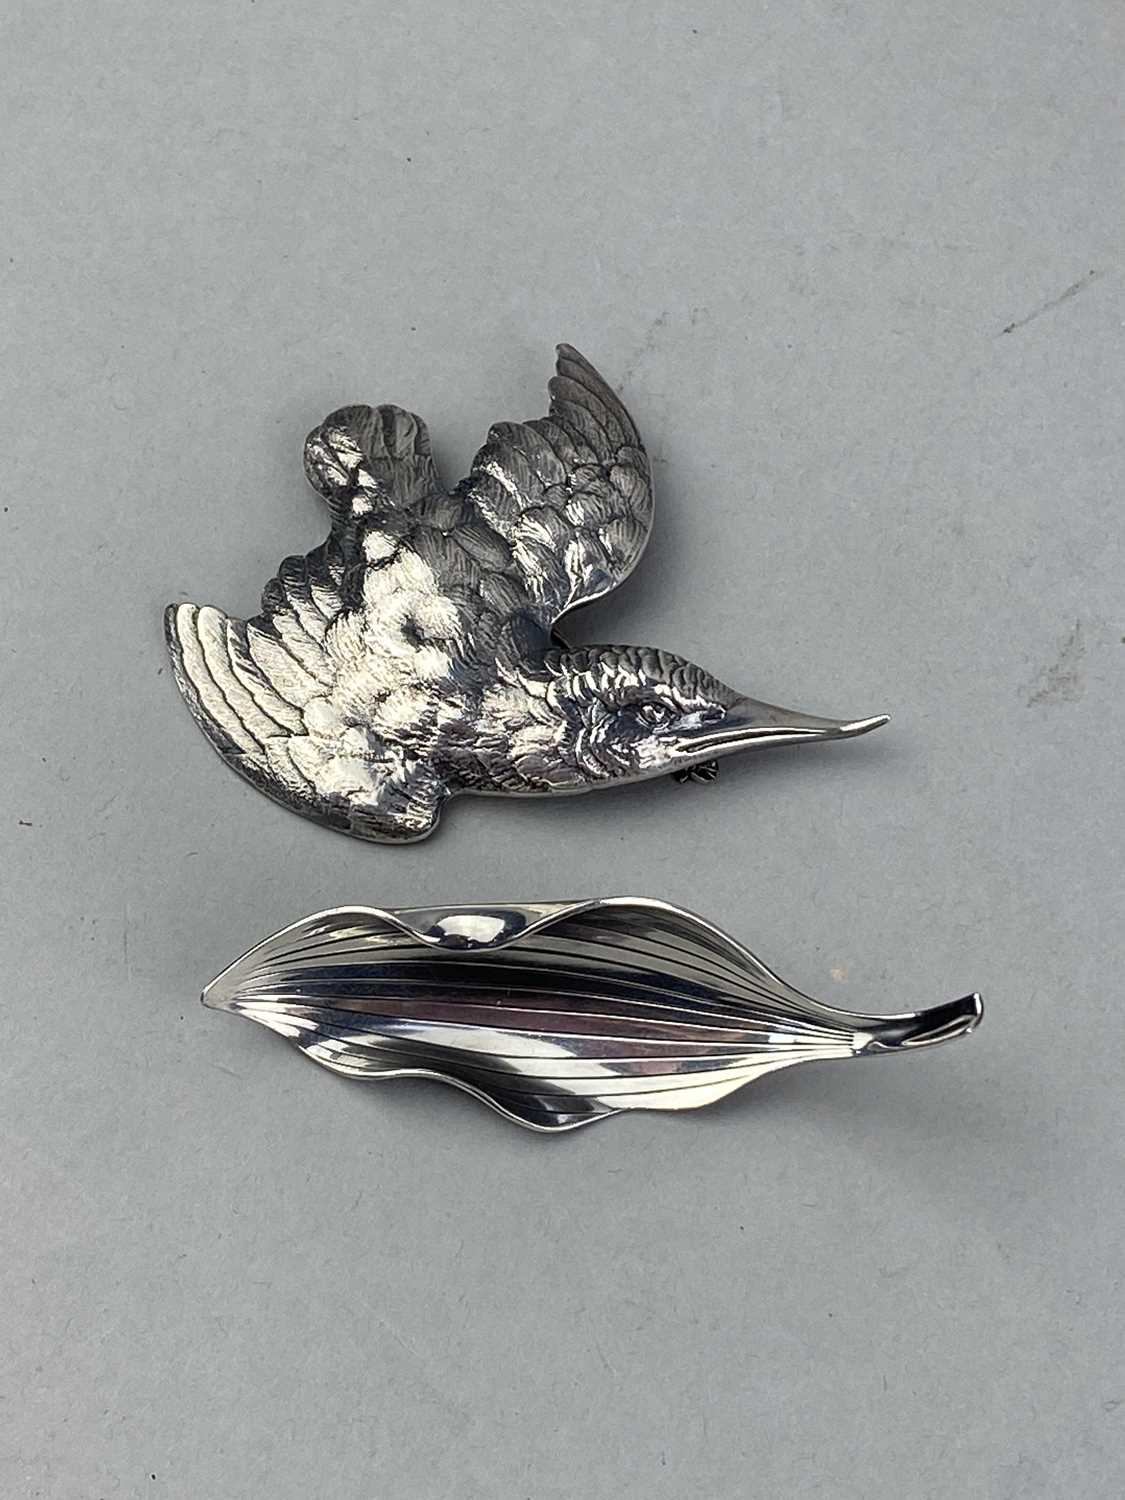 Lot 23 - A STERLING SILVER BROOCH MODELLED AS A BIRD AND A LEAF SHAPED BROOCH